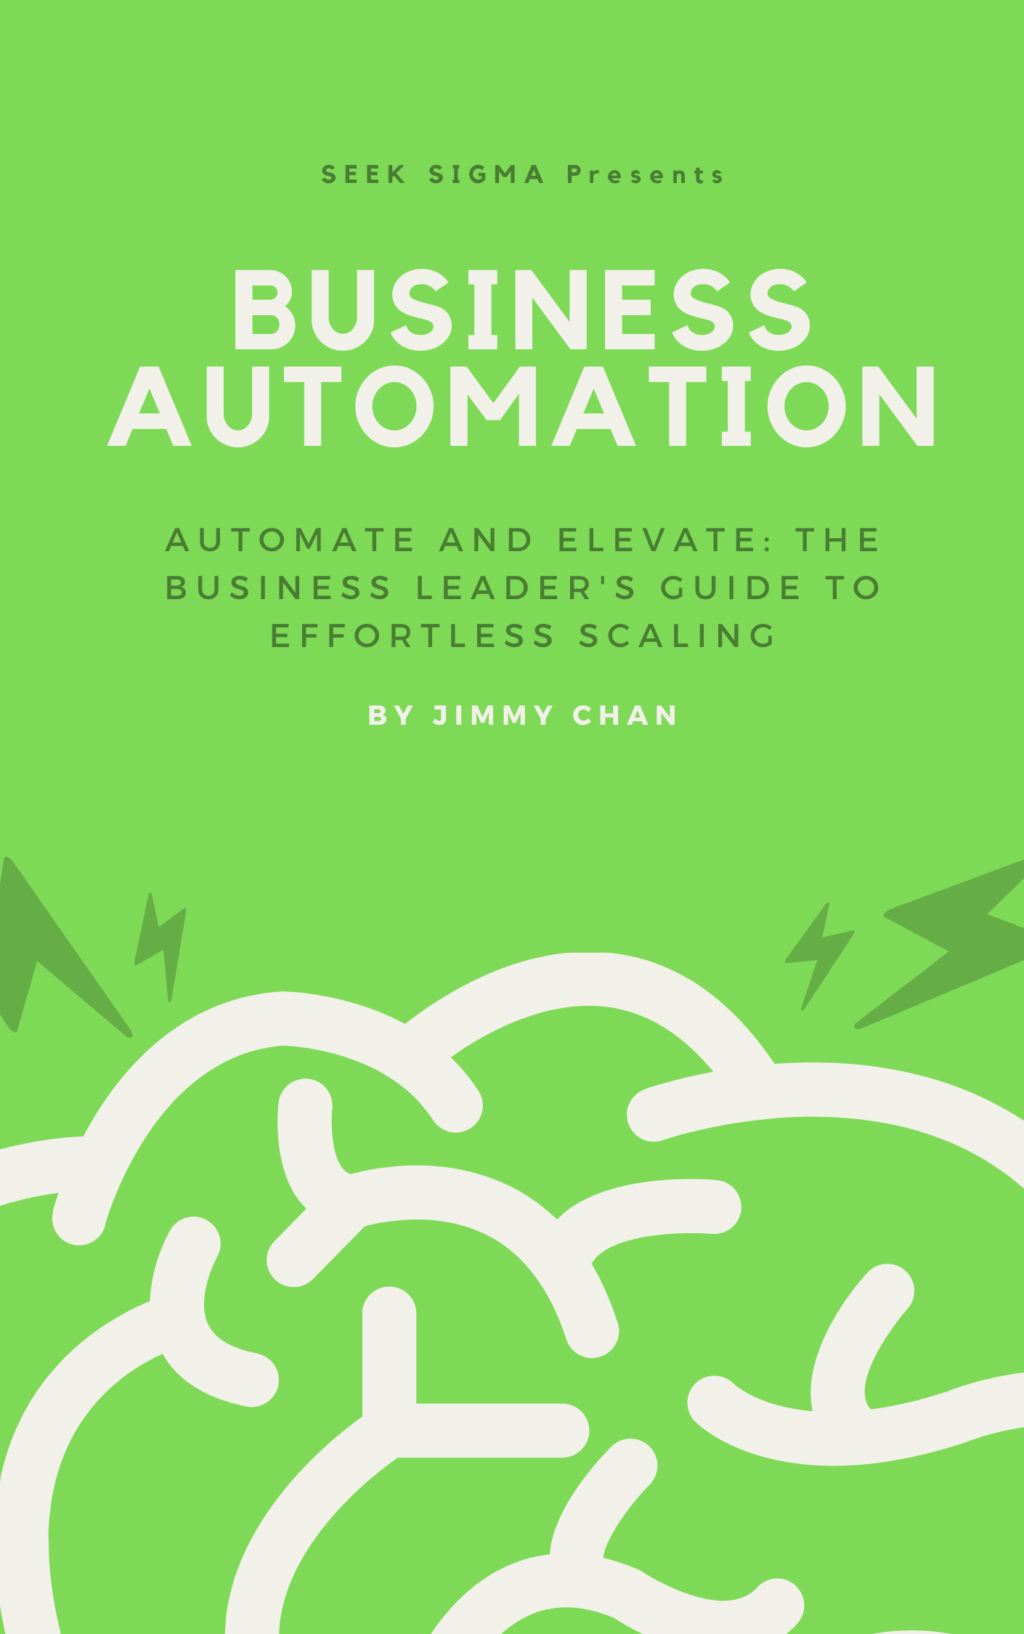 Automate and Elevate The Business Leader's Guide to Effortless Scaling